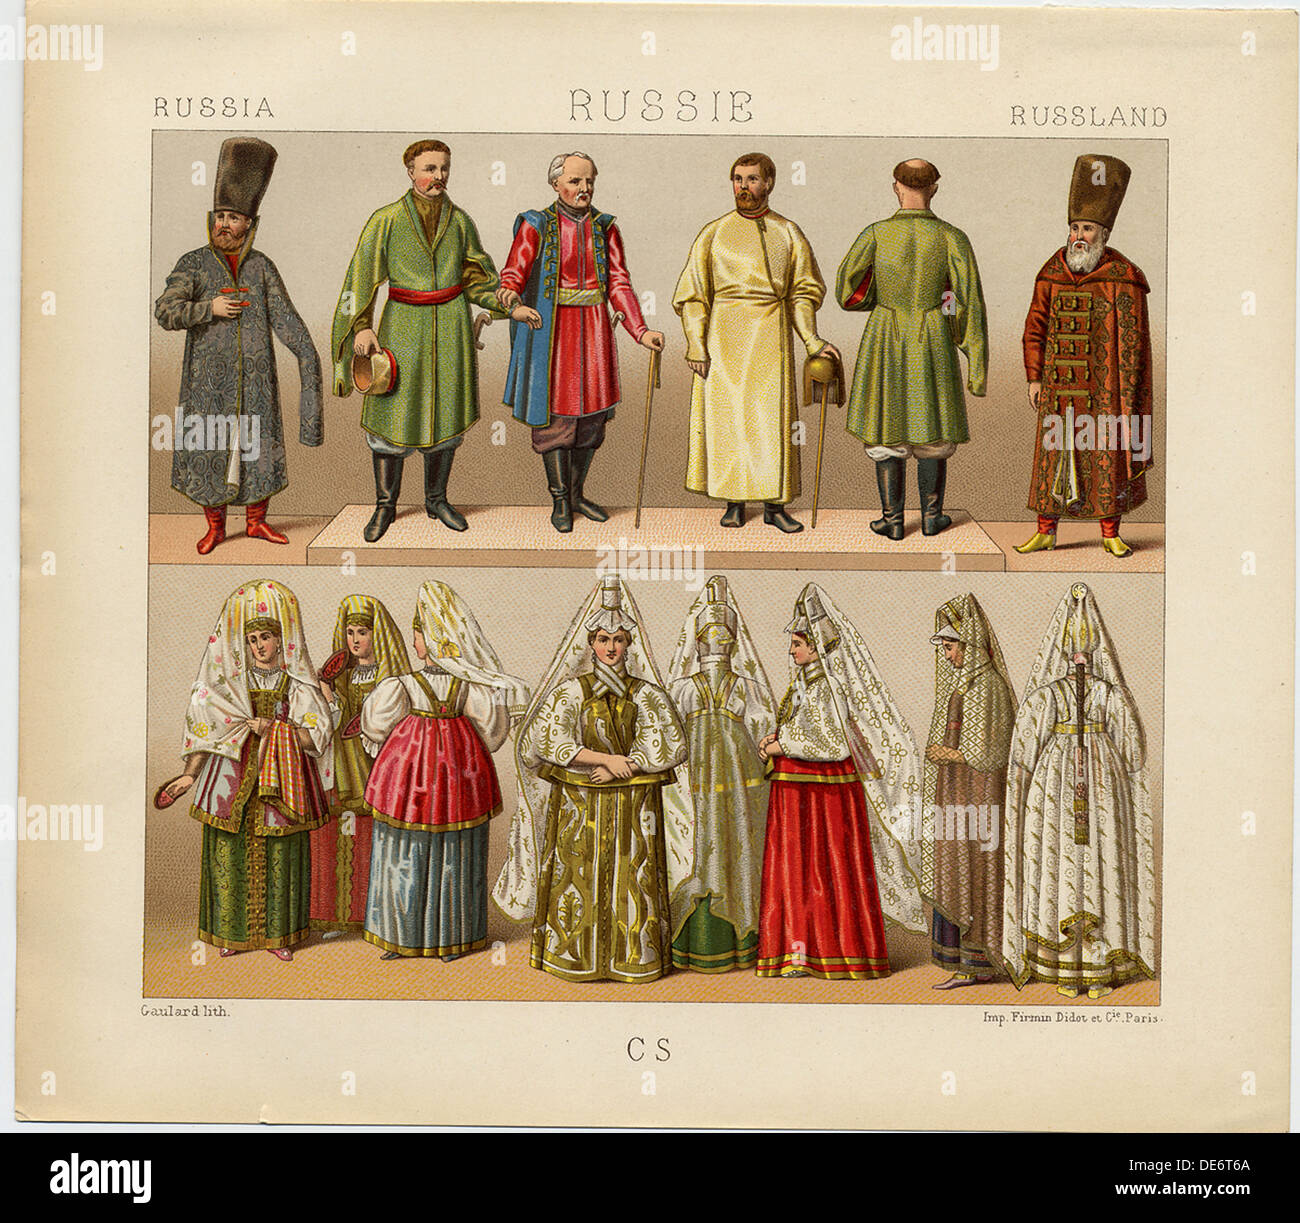 32,655 Russian Traditional Dress Images, Stock Photos, 3D objects